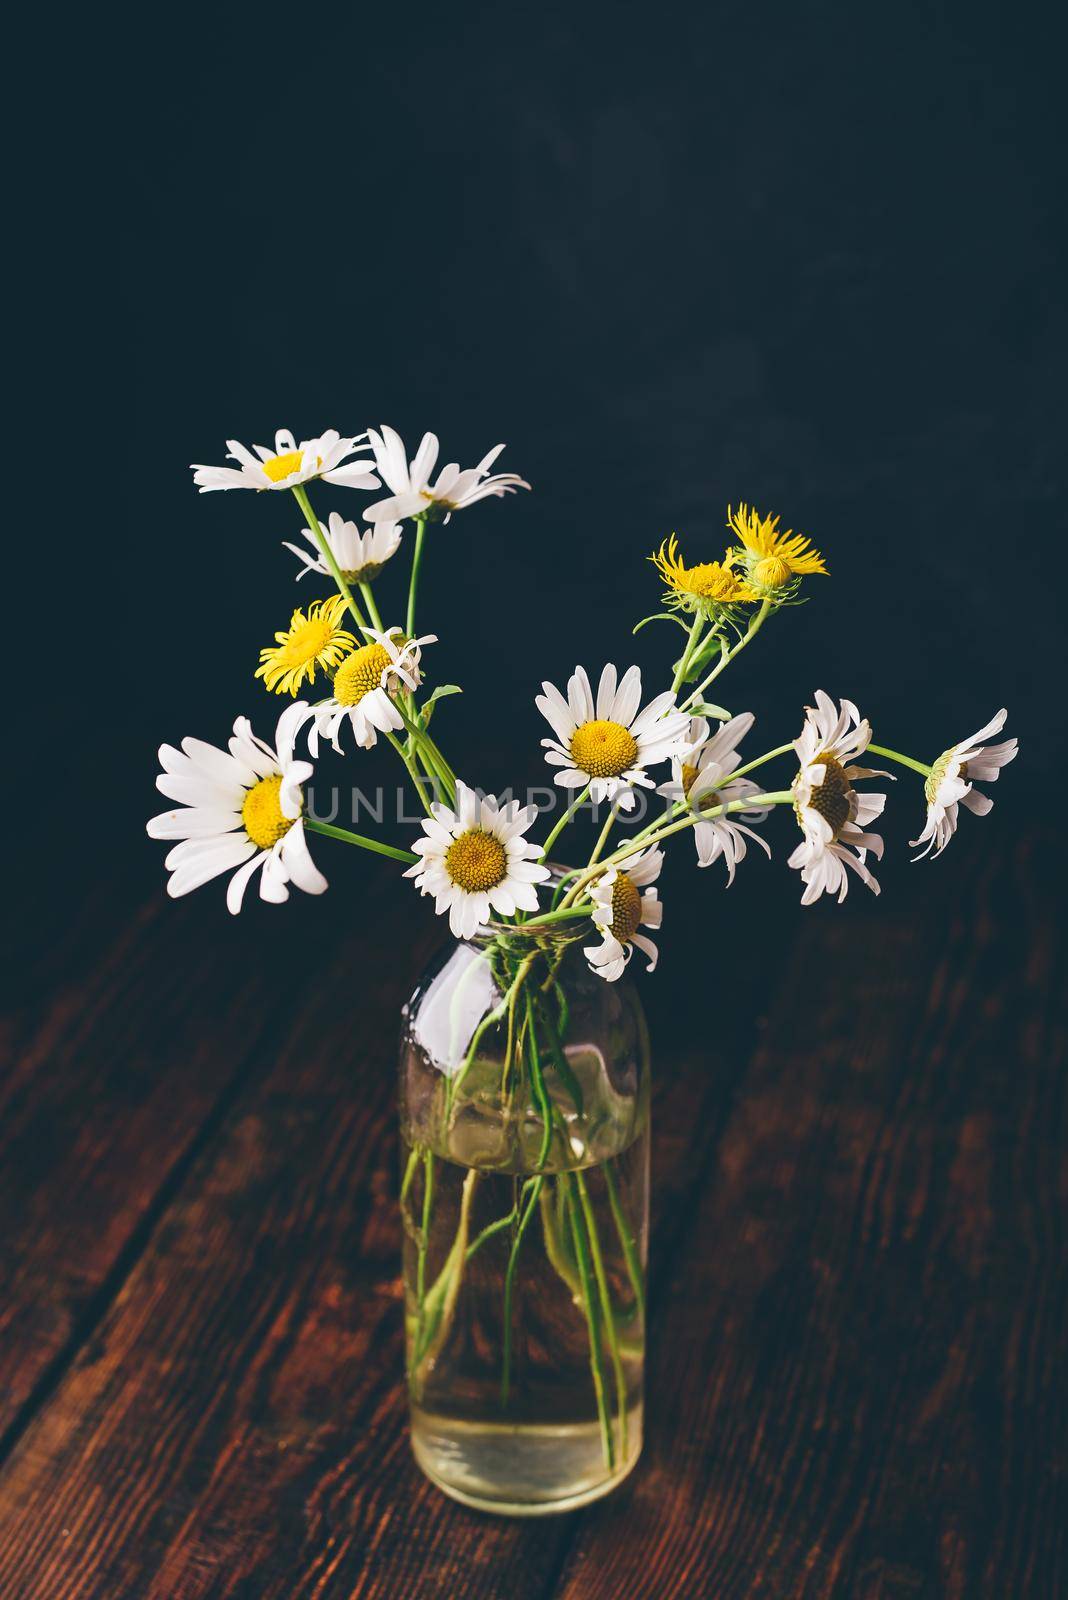 Small bouquet of wild chamomile flowers by Seva_blsv